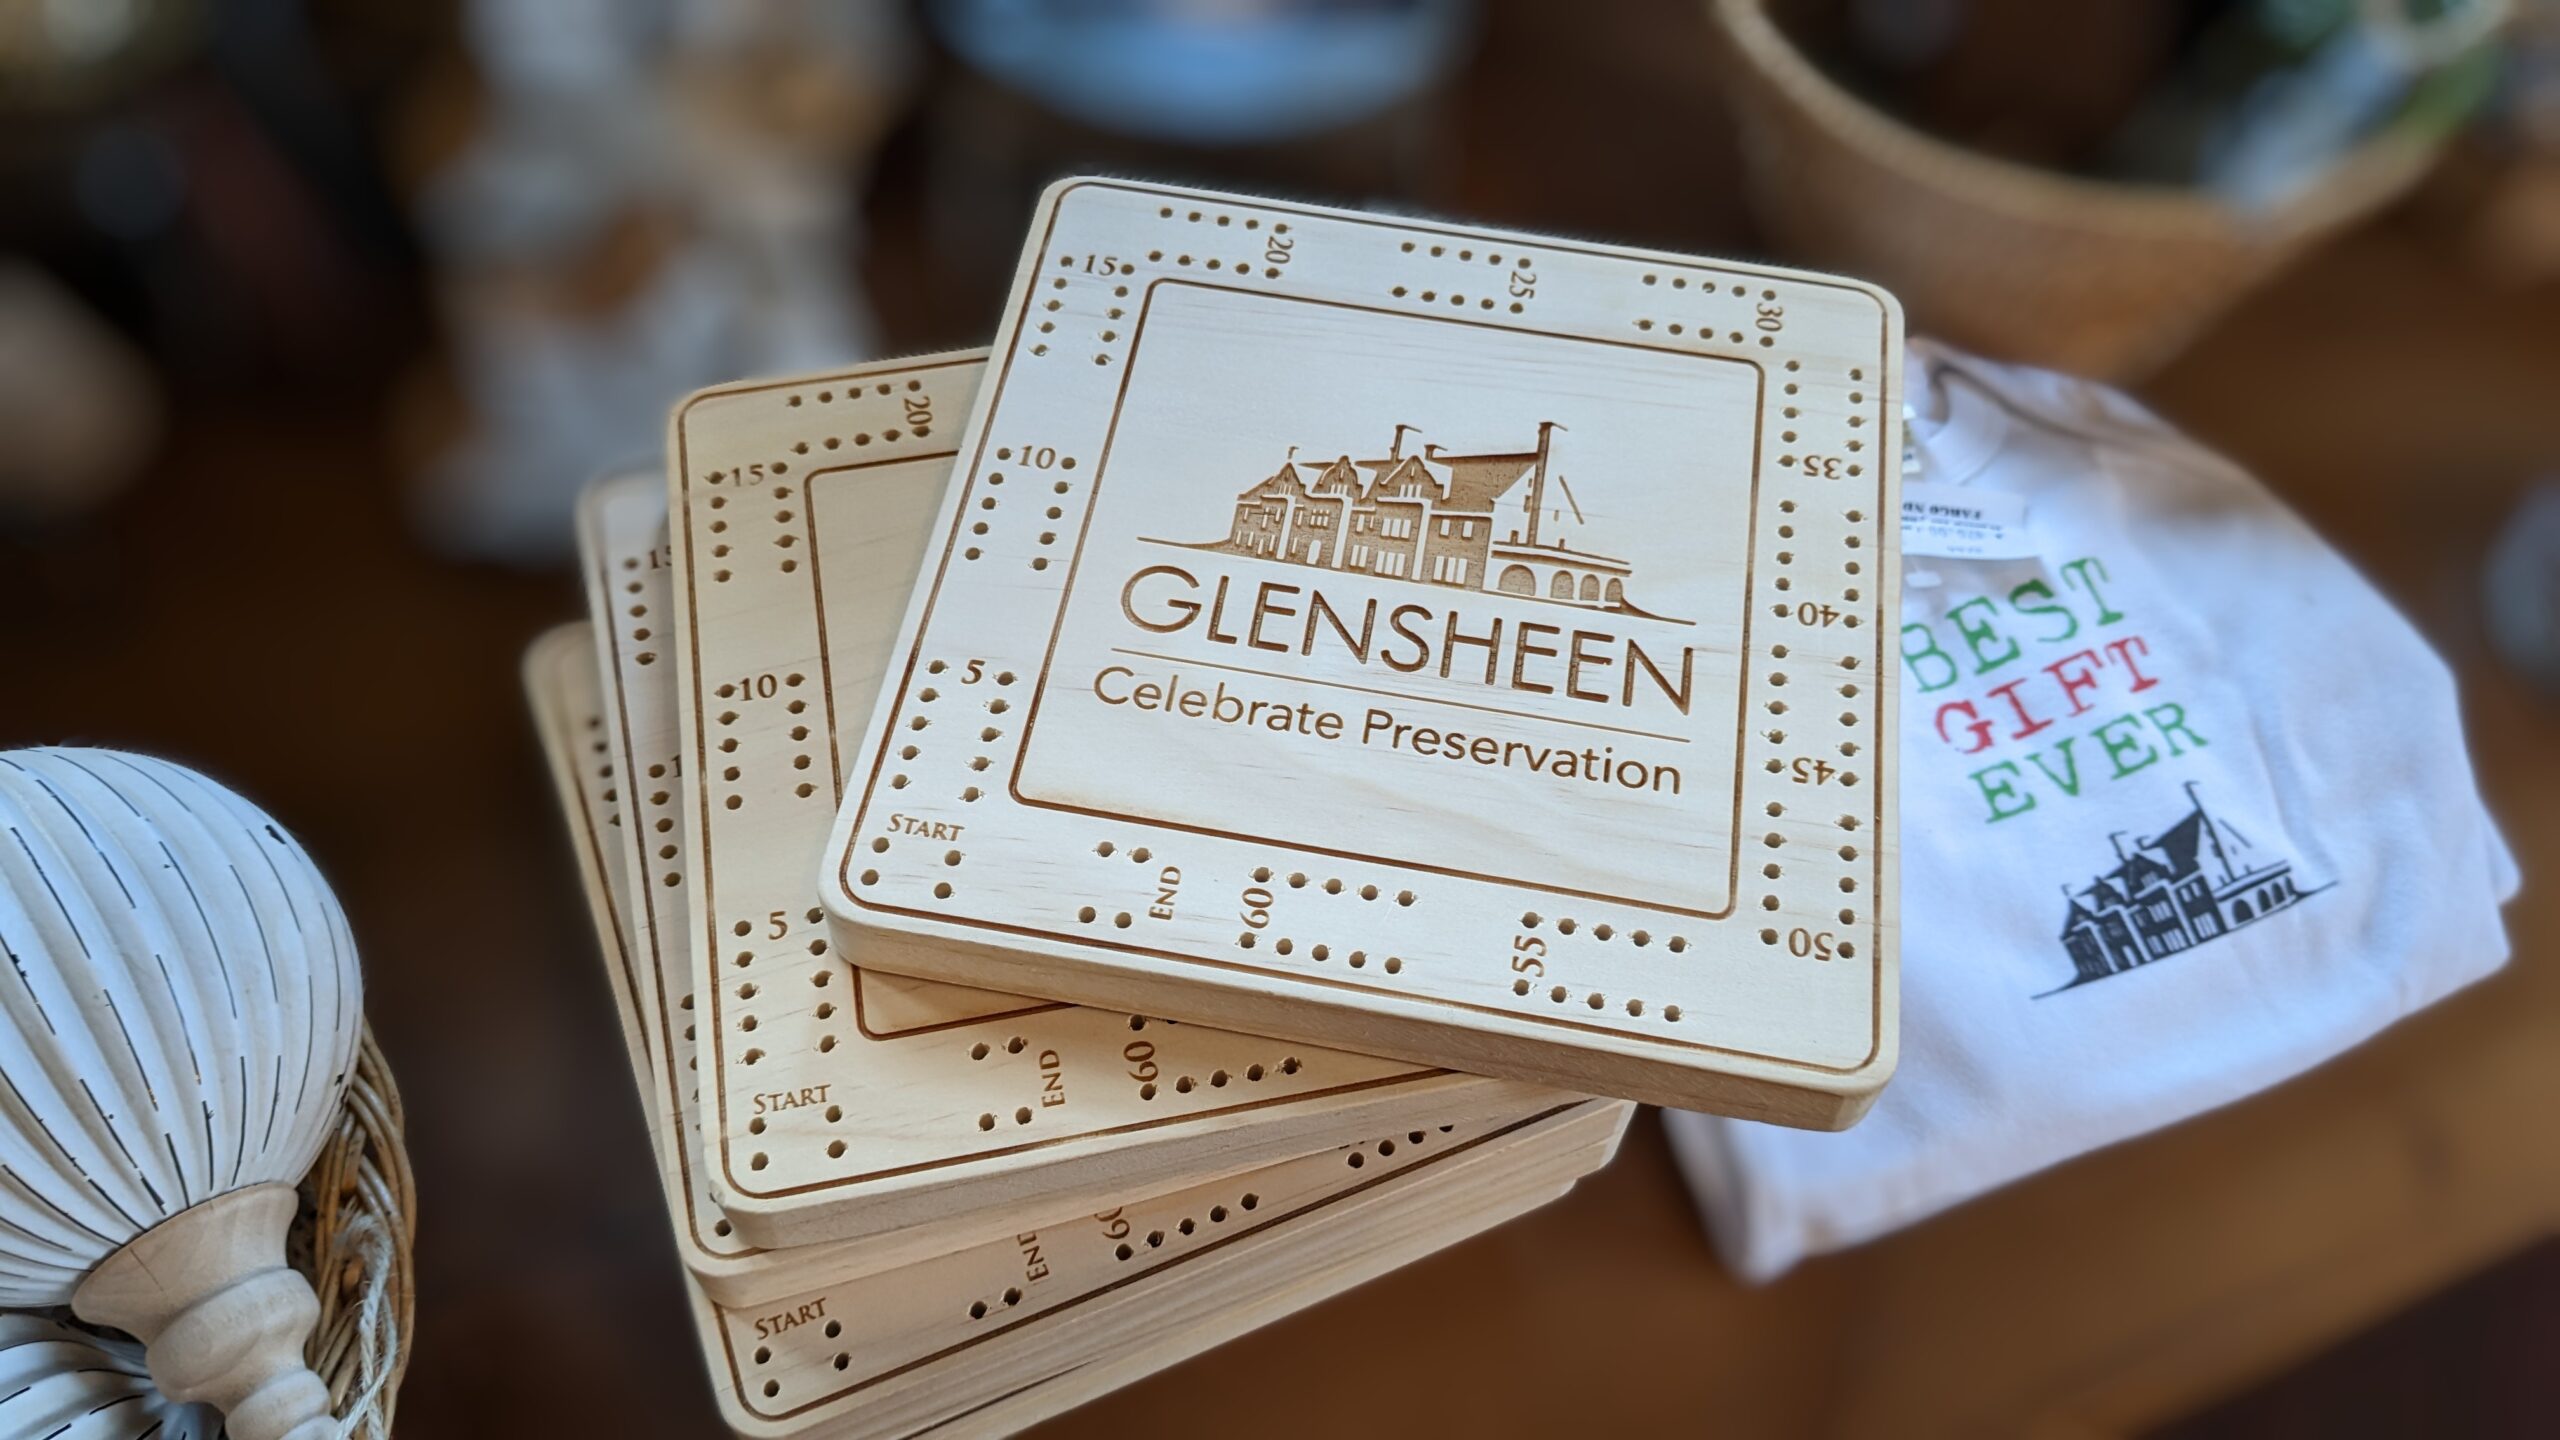 Wooden cribbage boards with the Glensheen logo sit on a table with a white t shirt in the background.